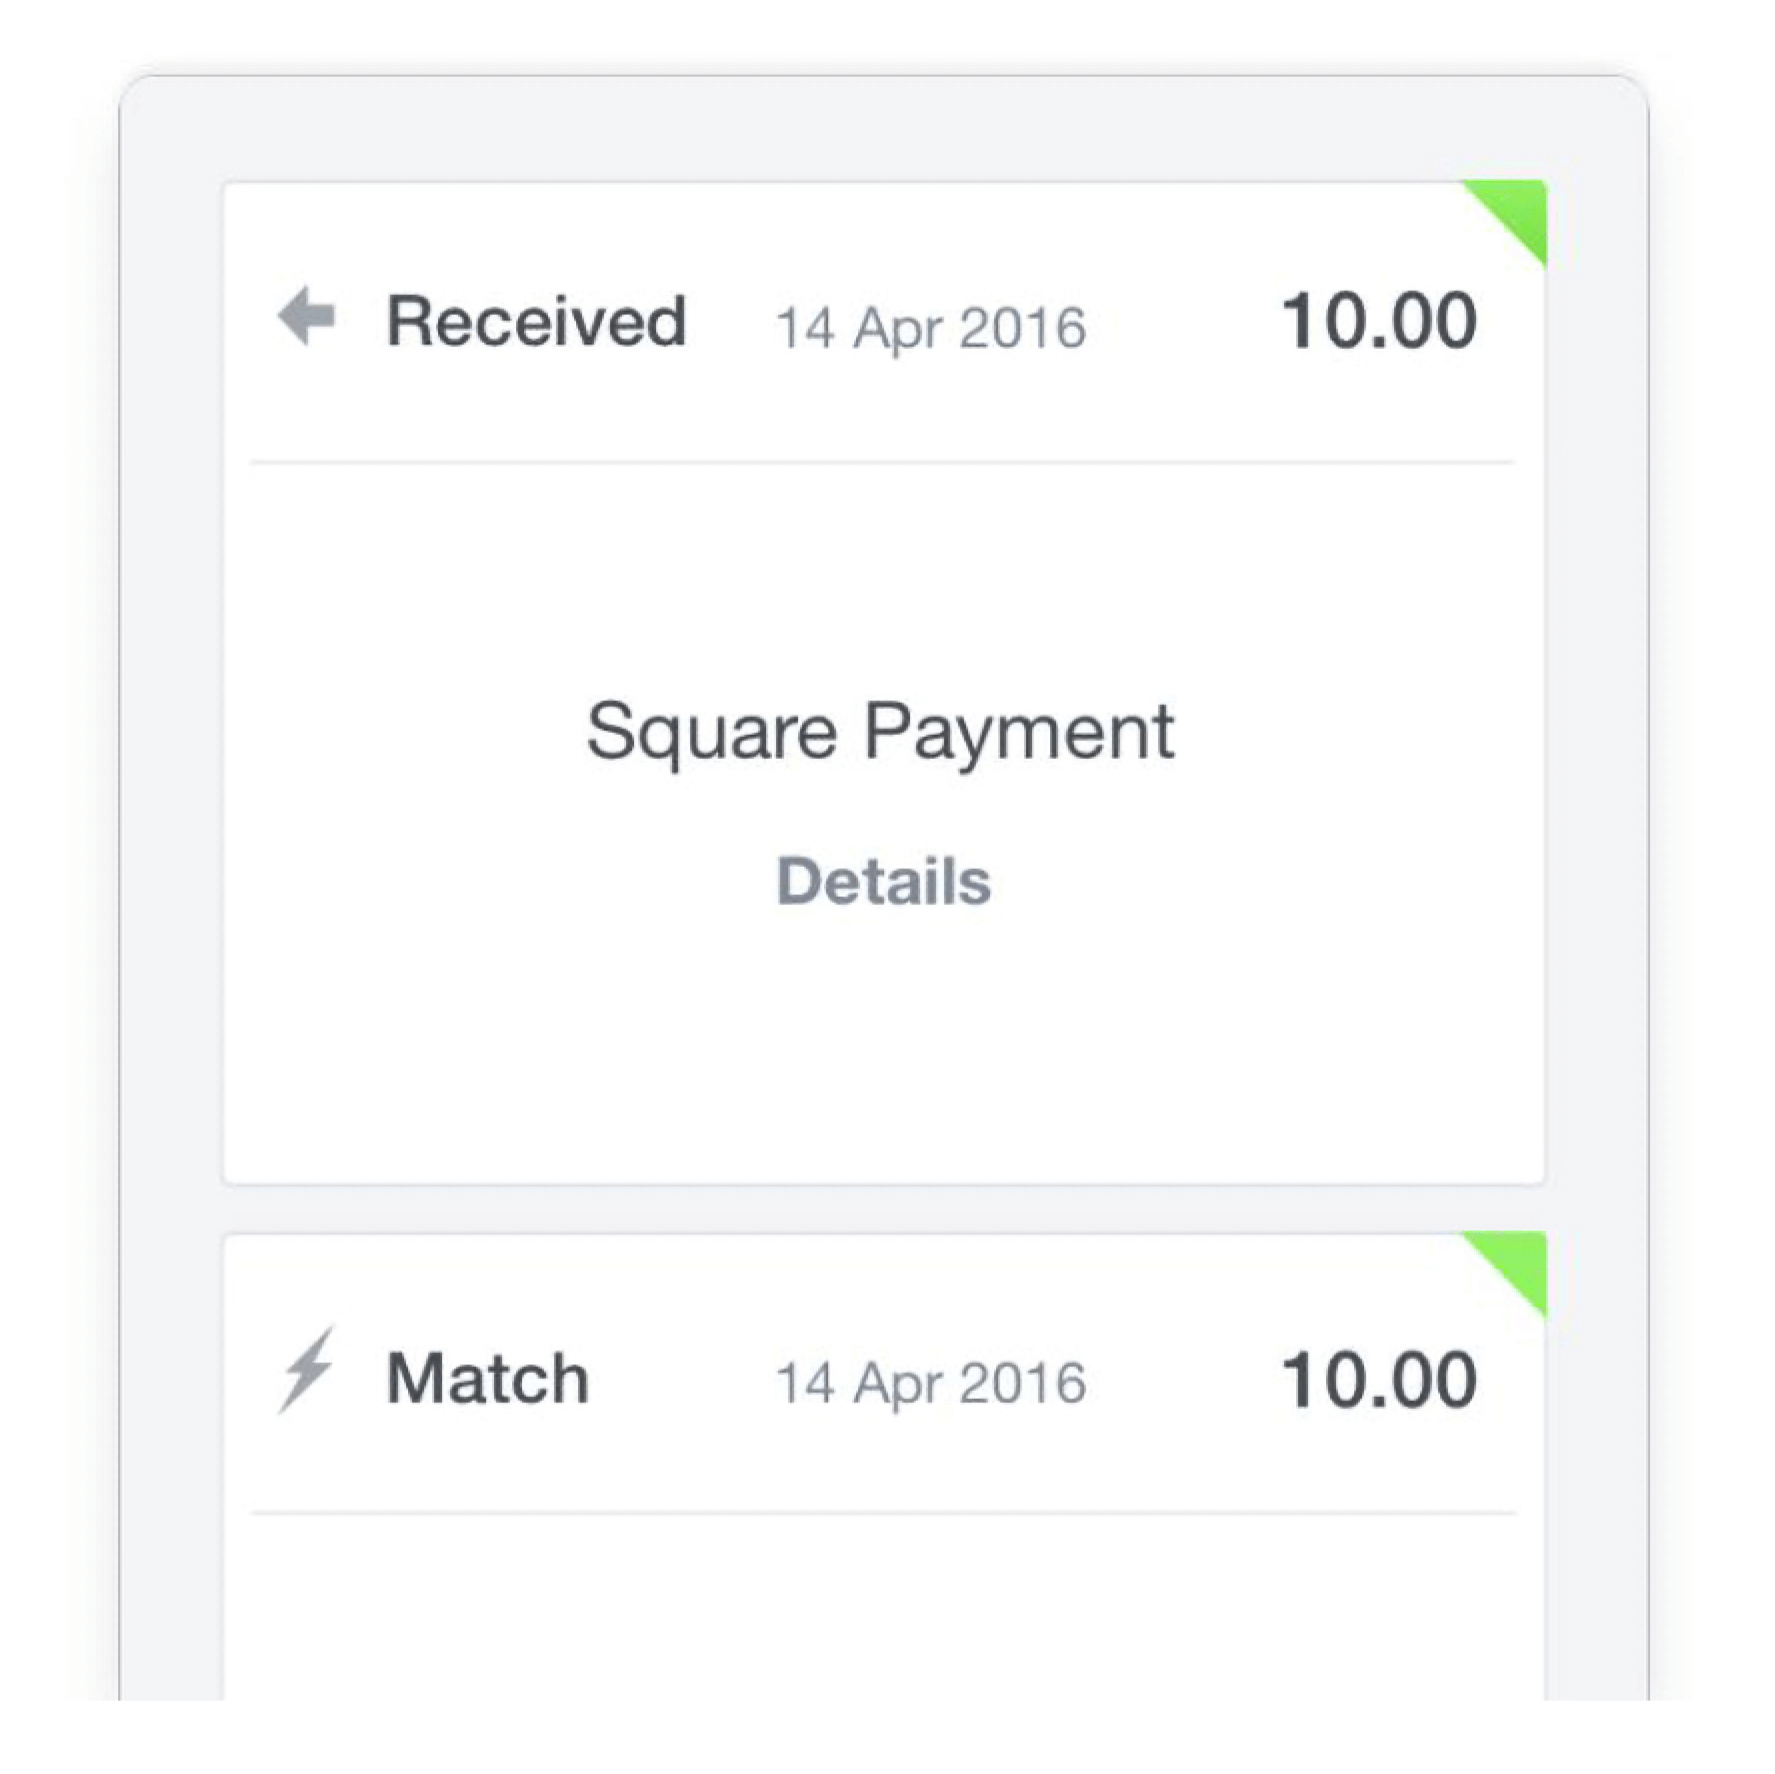 A received square payment notification